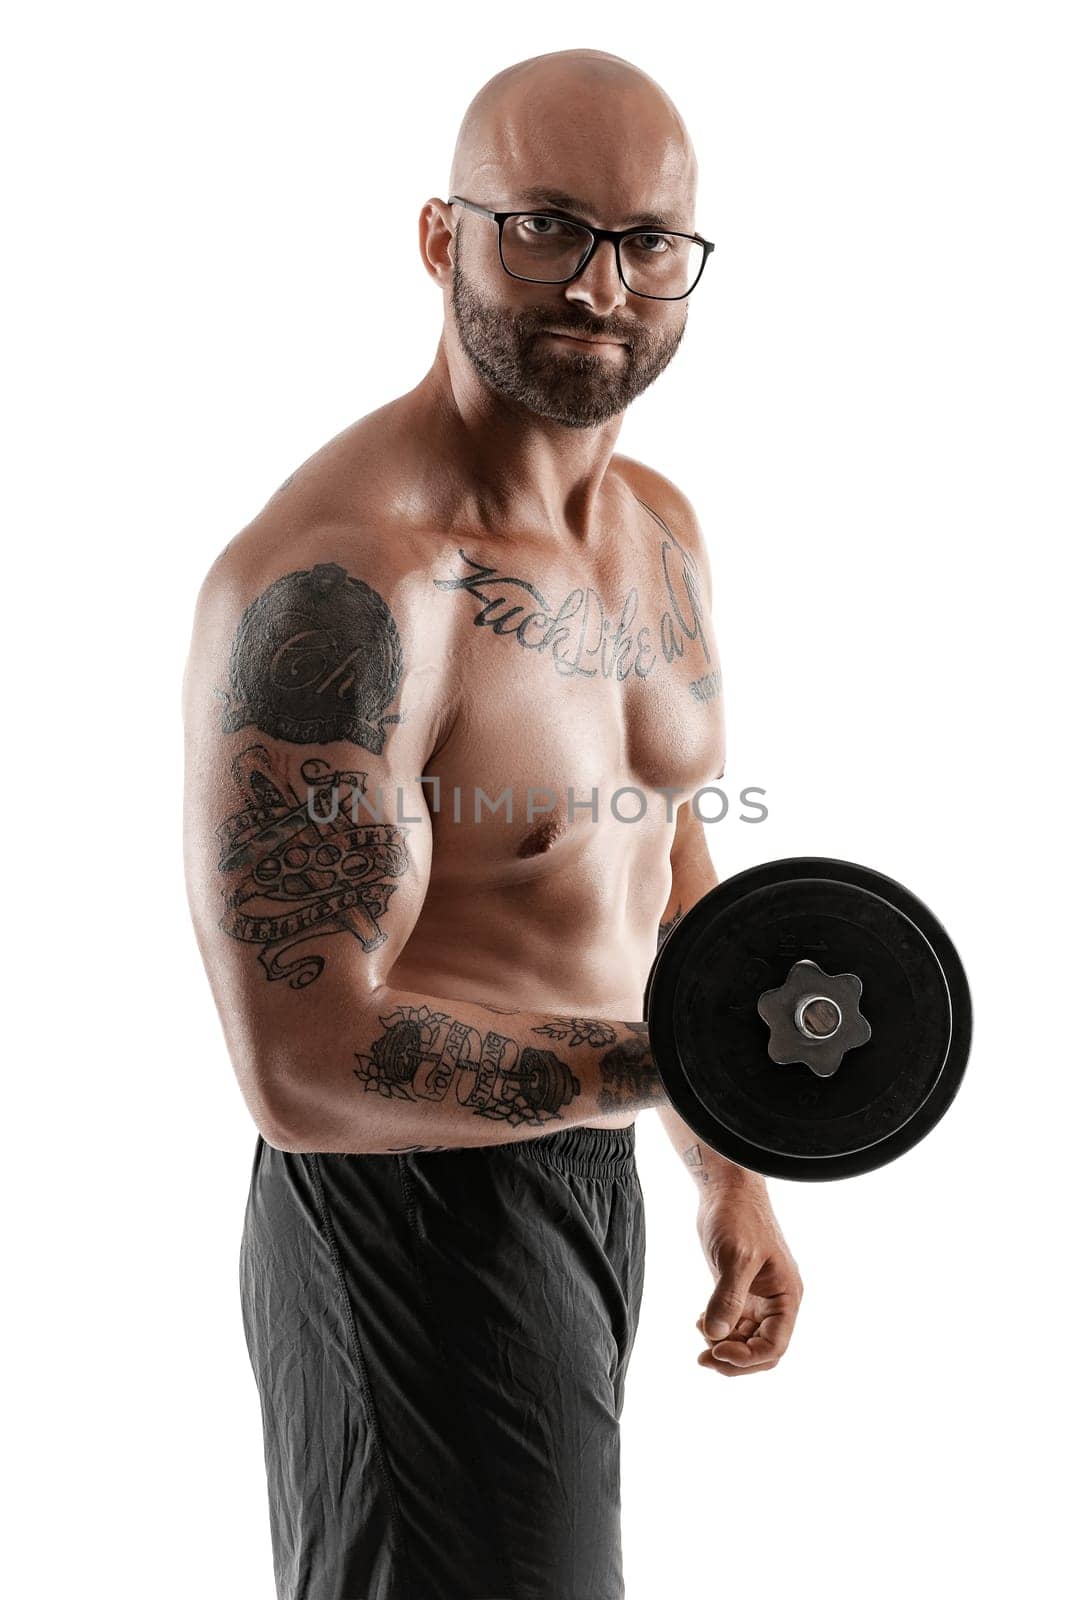 Handsome bald, bearded, tattooed guy in glasses, black shorts is posing holding a dumbbell in his hand isolated on white background and looking at the camera. Chic muscular body, fitness, gym, healthy lifestyle concept. Close-up portrait.